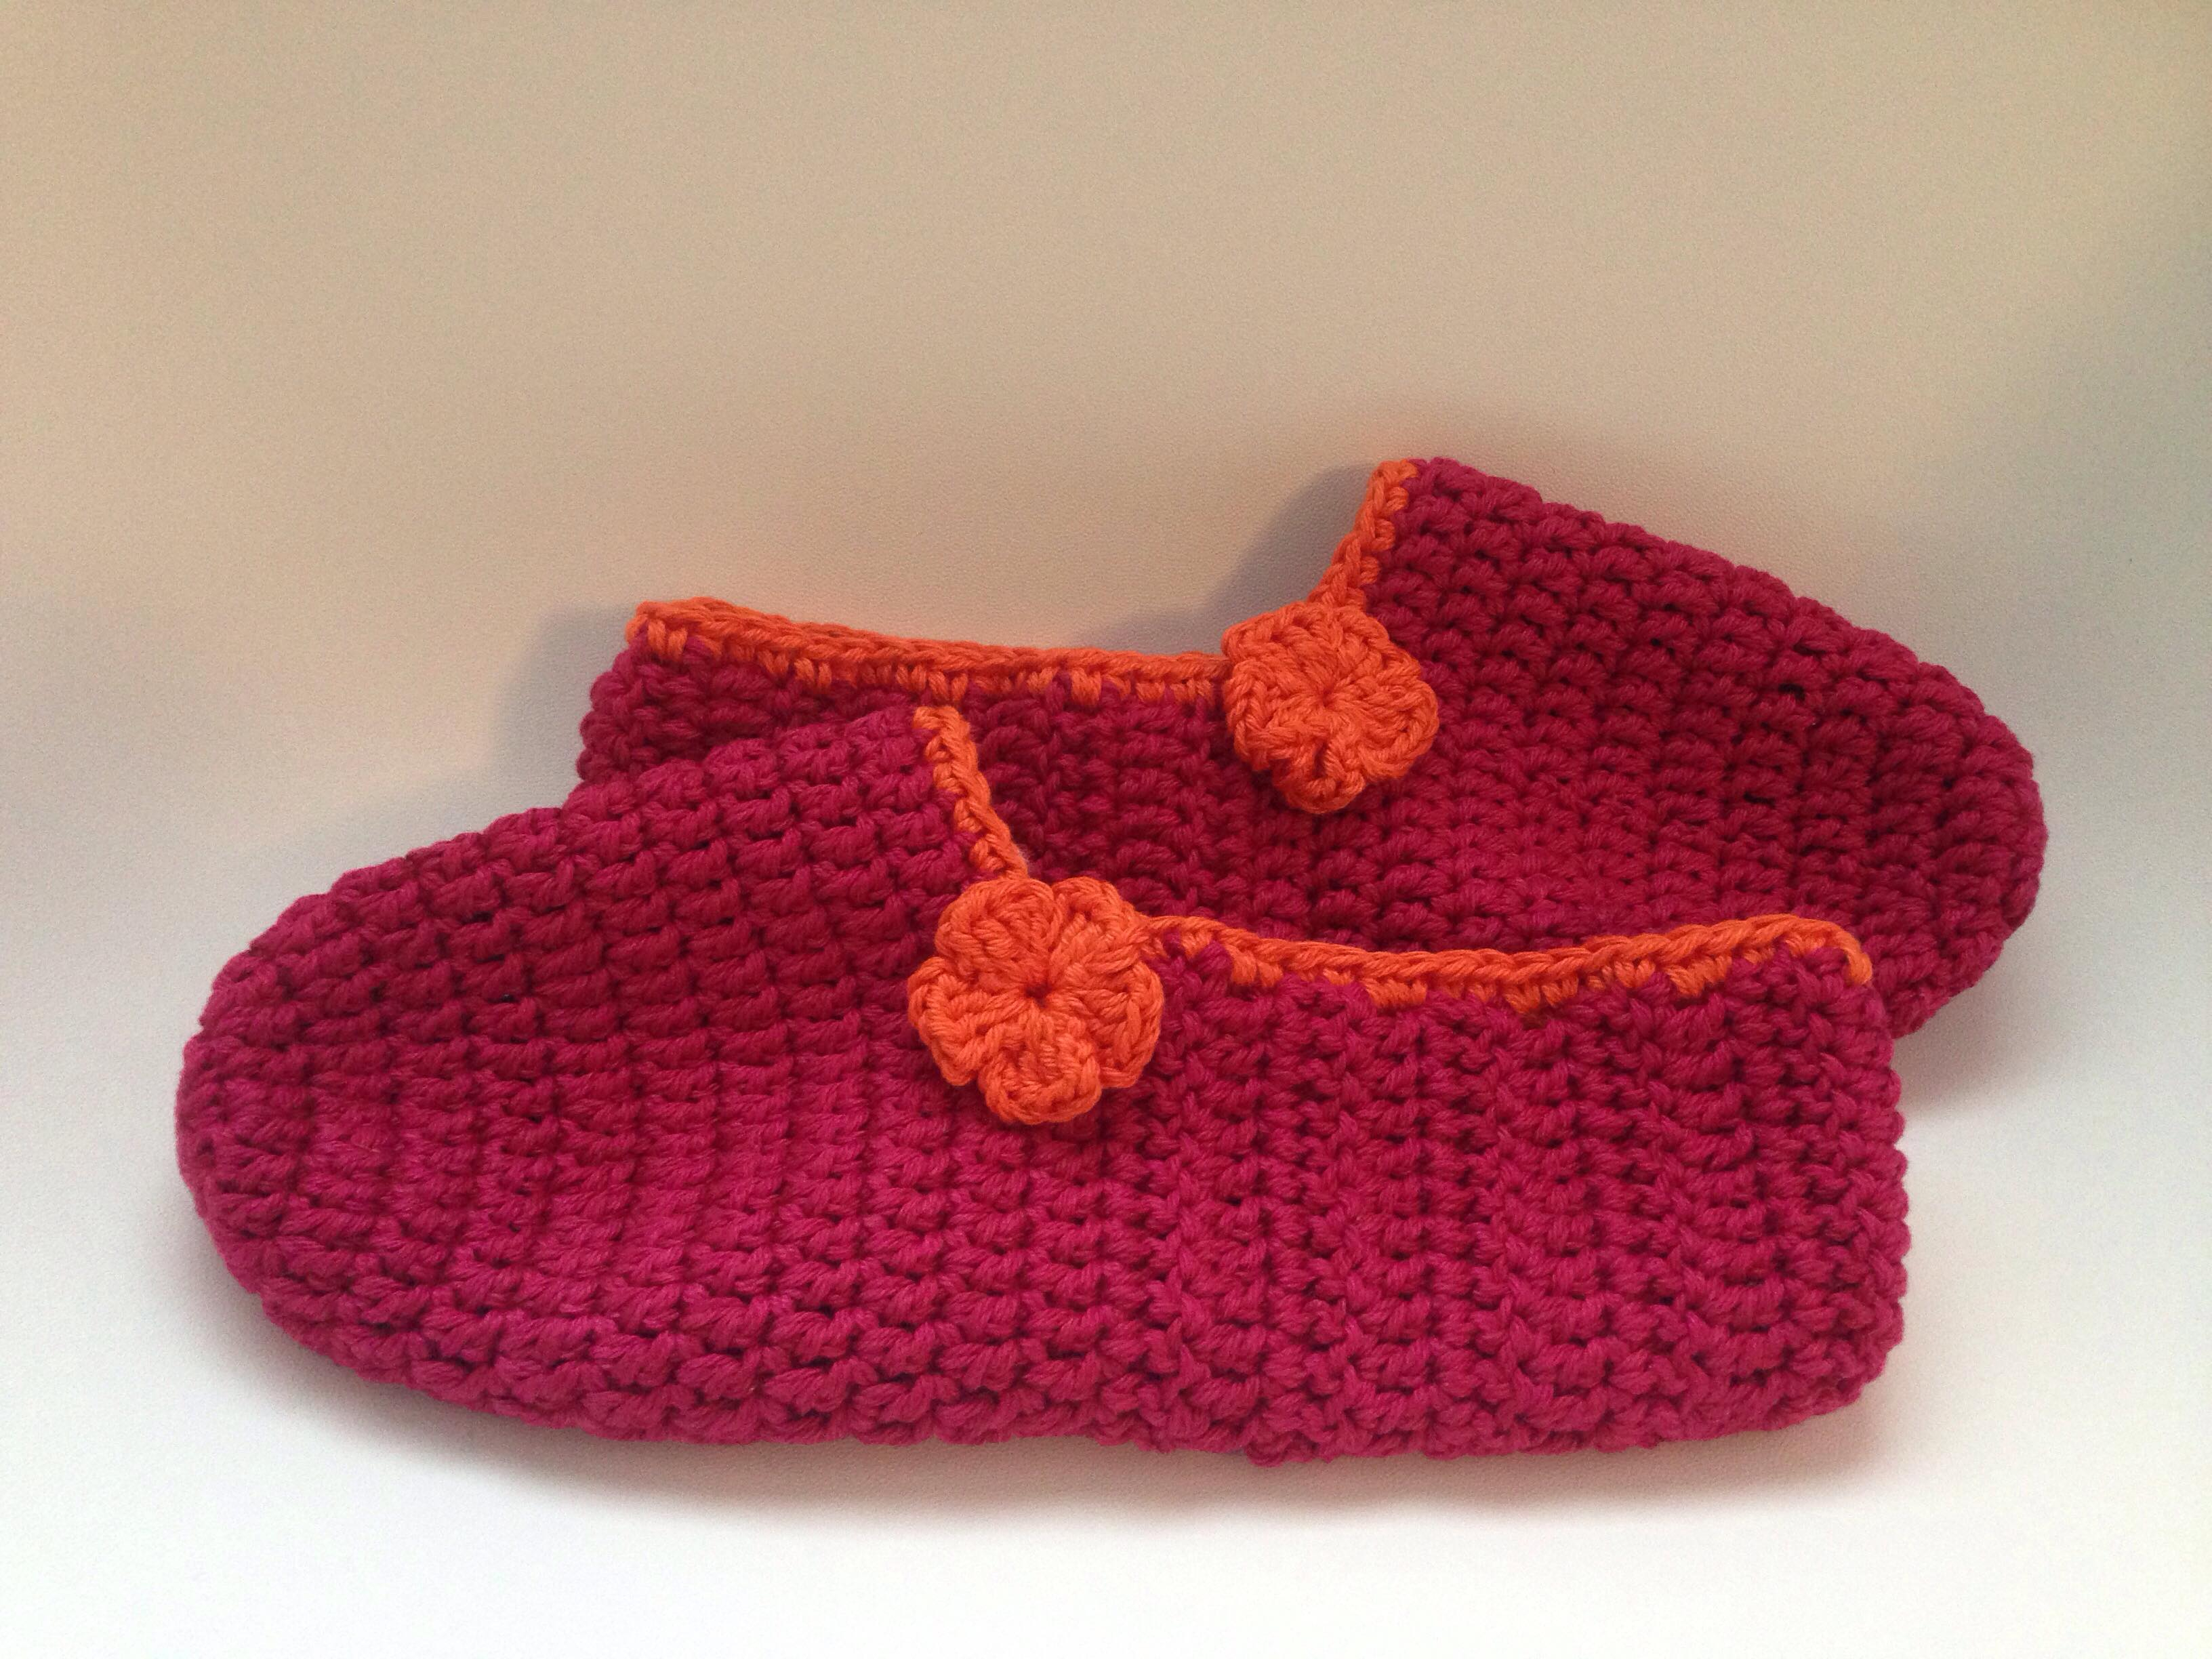 Crochet Shoes Pattern Easy Beginner Crochet Slippers Itchin For Some Stitchin